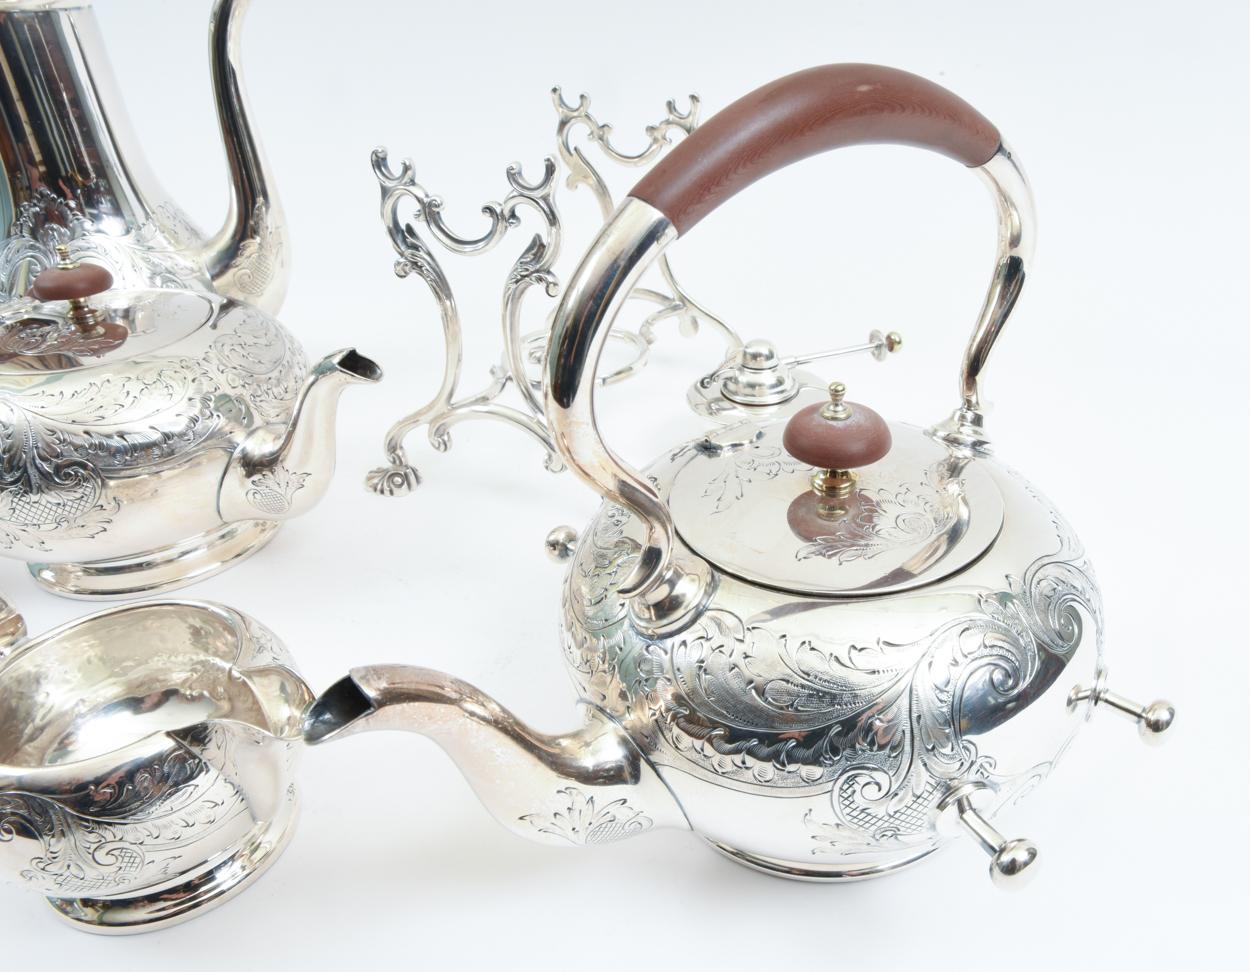 Early 20th Century English Five-Piece Silver Plate Tea or Coffee Service with Wood Handle